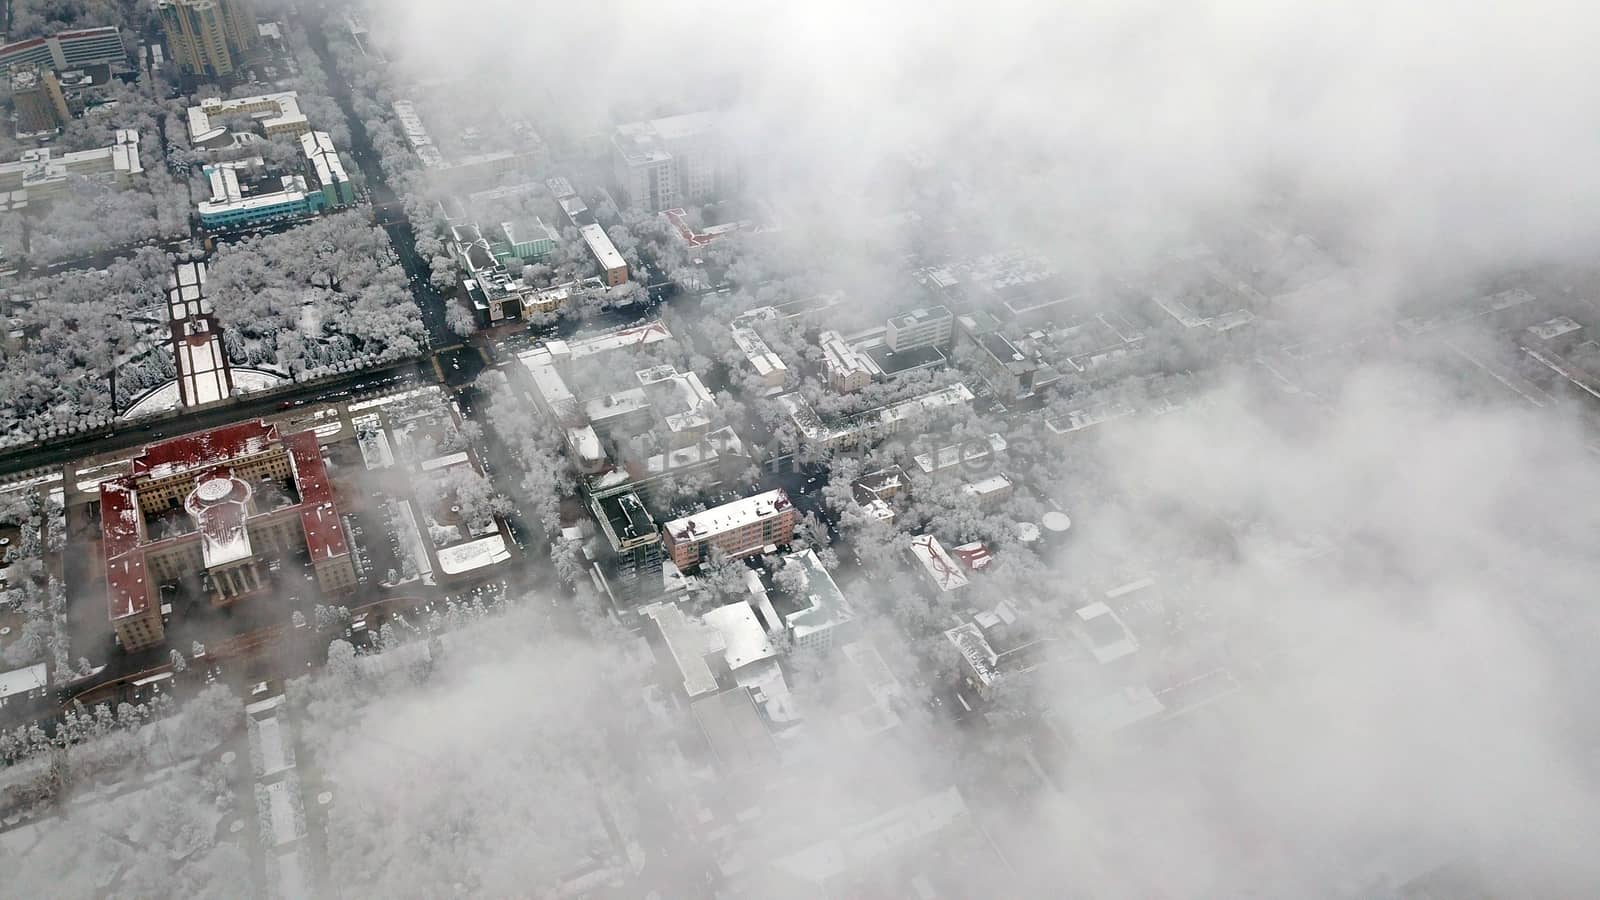 Top view through the clouds on the city of Almaty. Winter atmosphere, white trees, bushes, roofs of houses. Flying over the city. White clouds and light fog. Traffic of cars on roads. Through clouds.